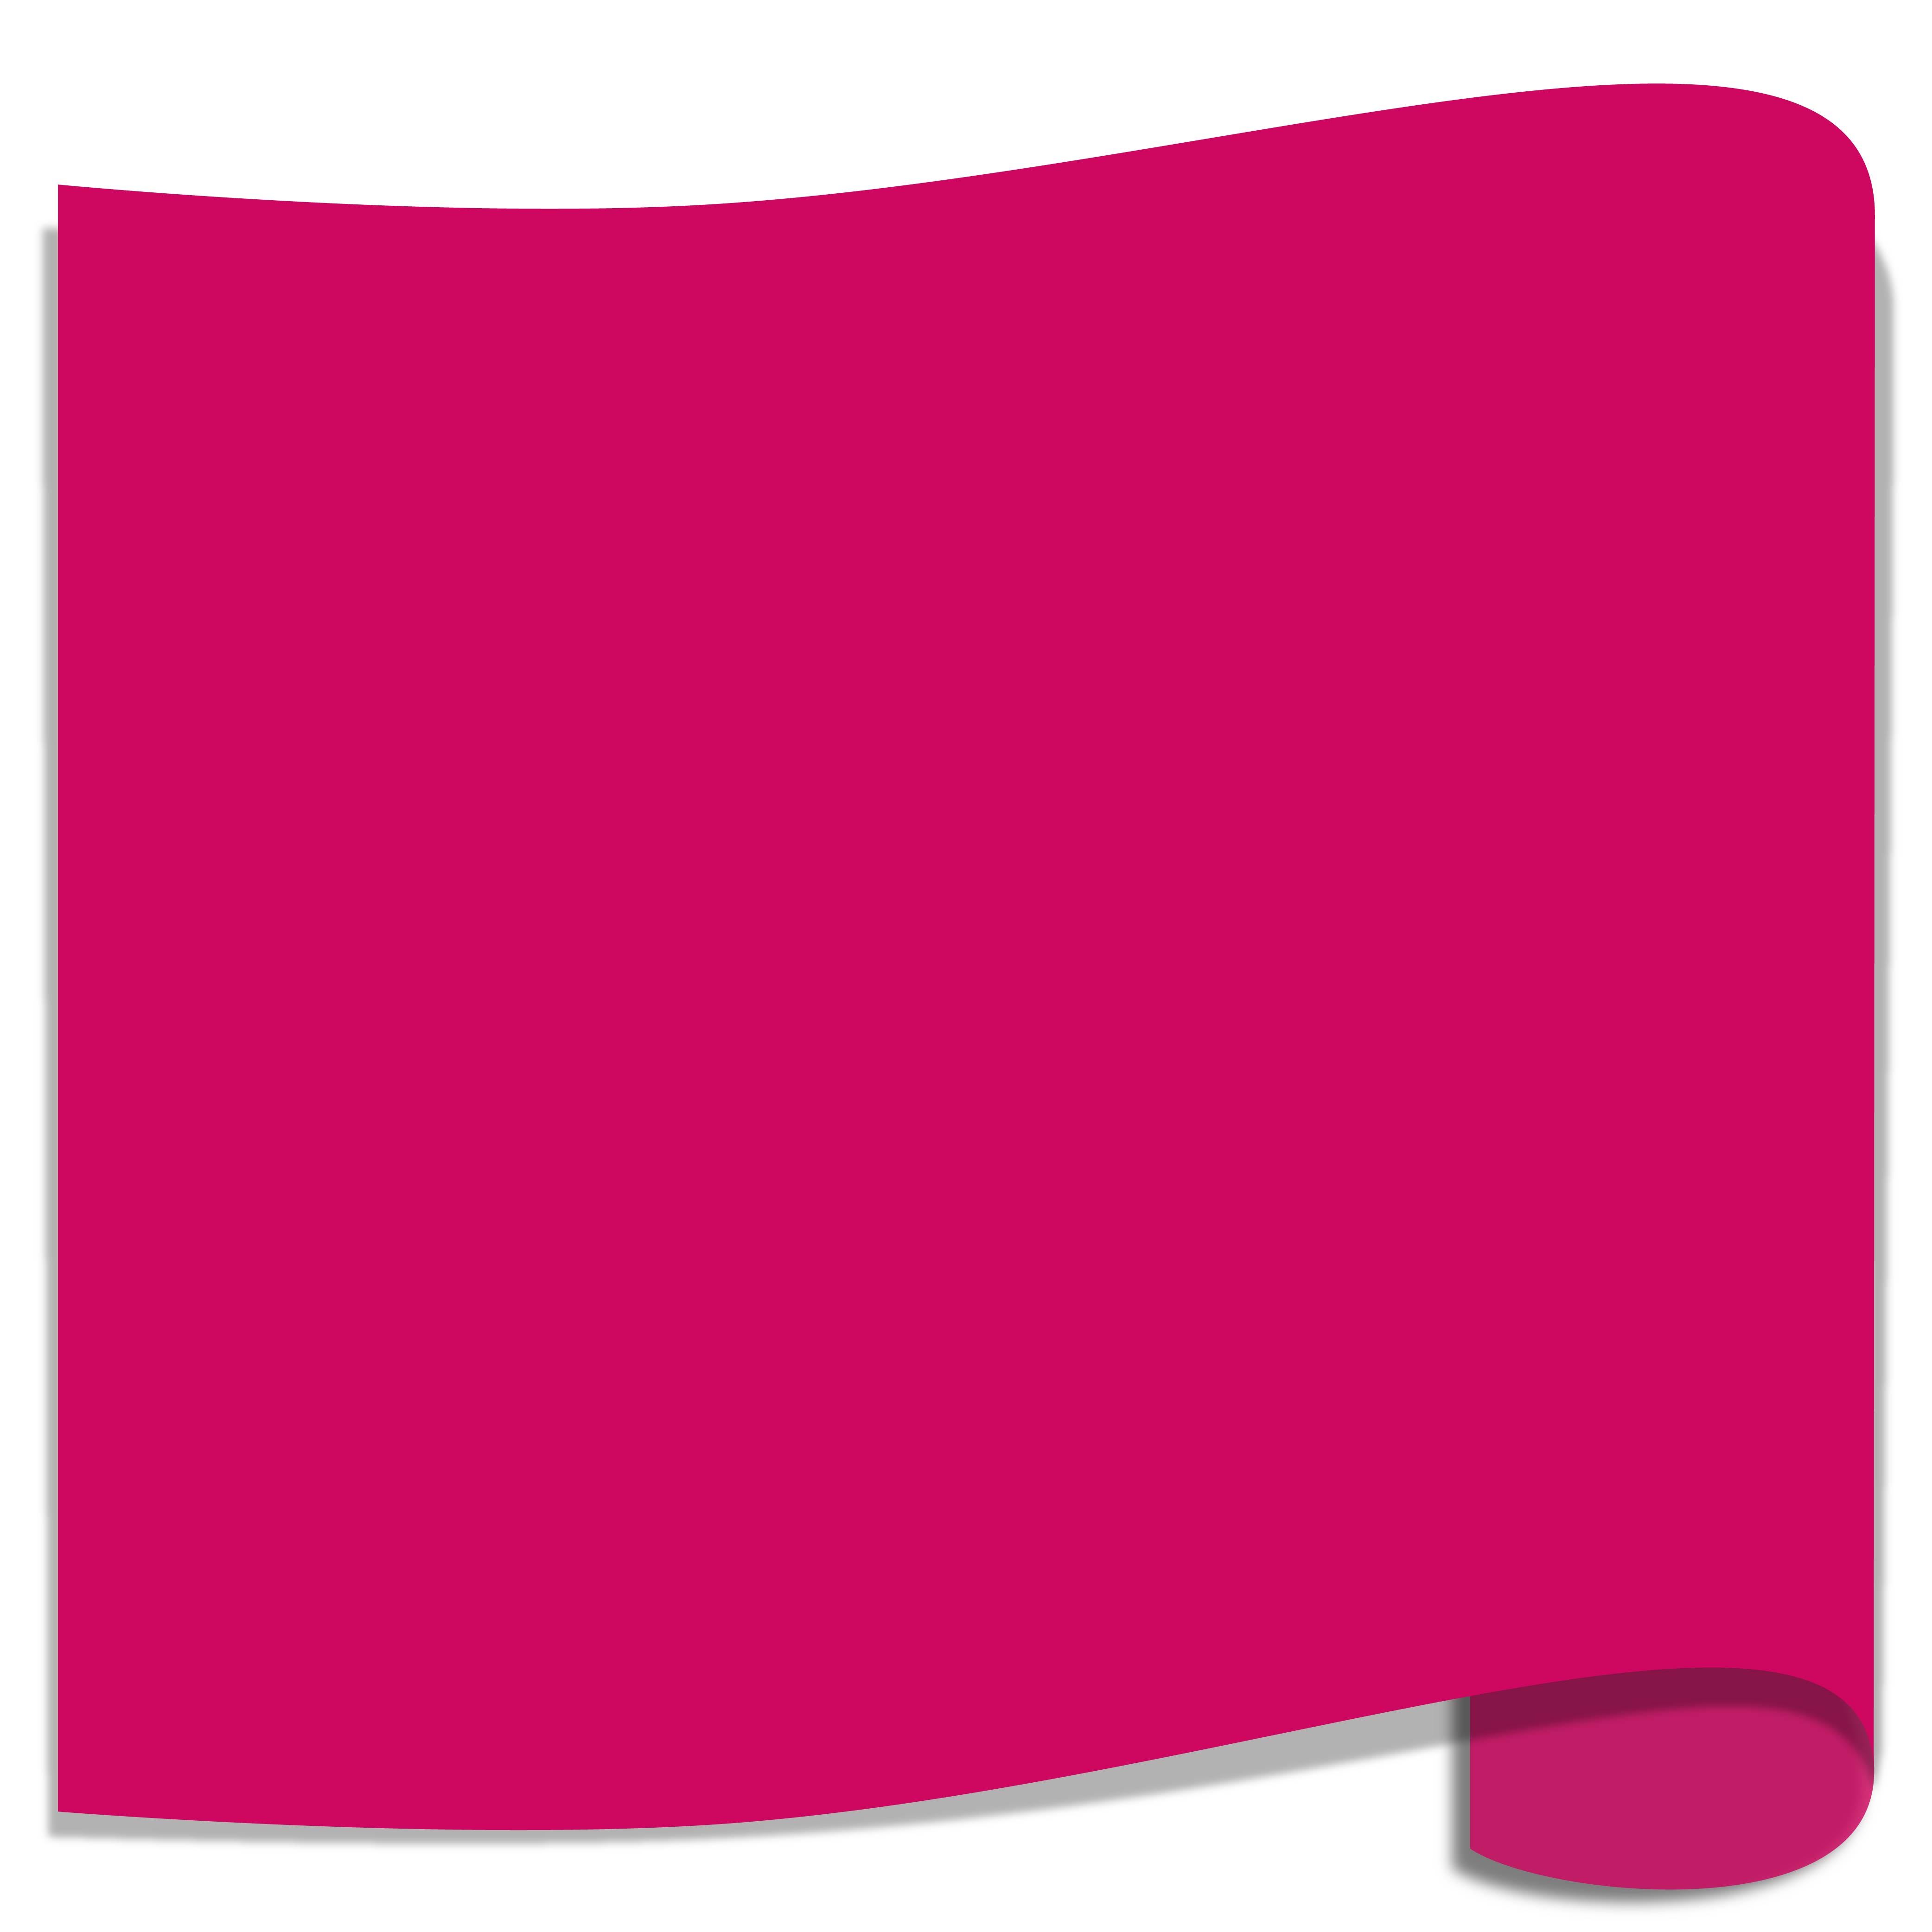 Siser EasyWeed Stretch Heat Transfer Vinyl (HTV) 15 x 12 Sheet - Passion  Pink